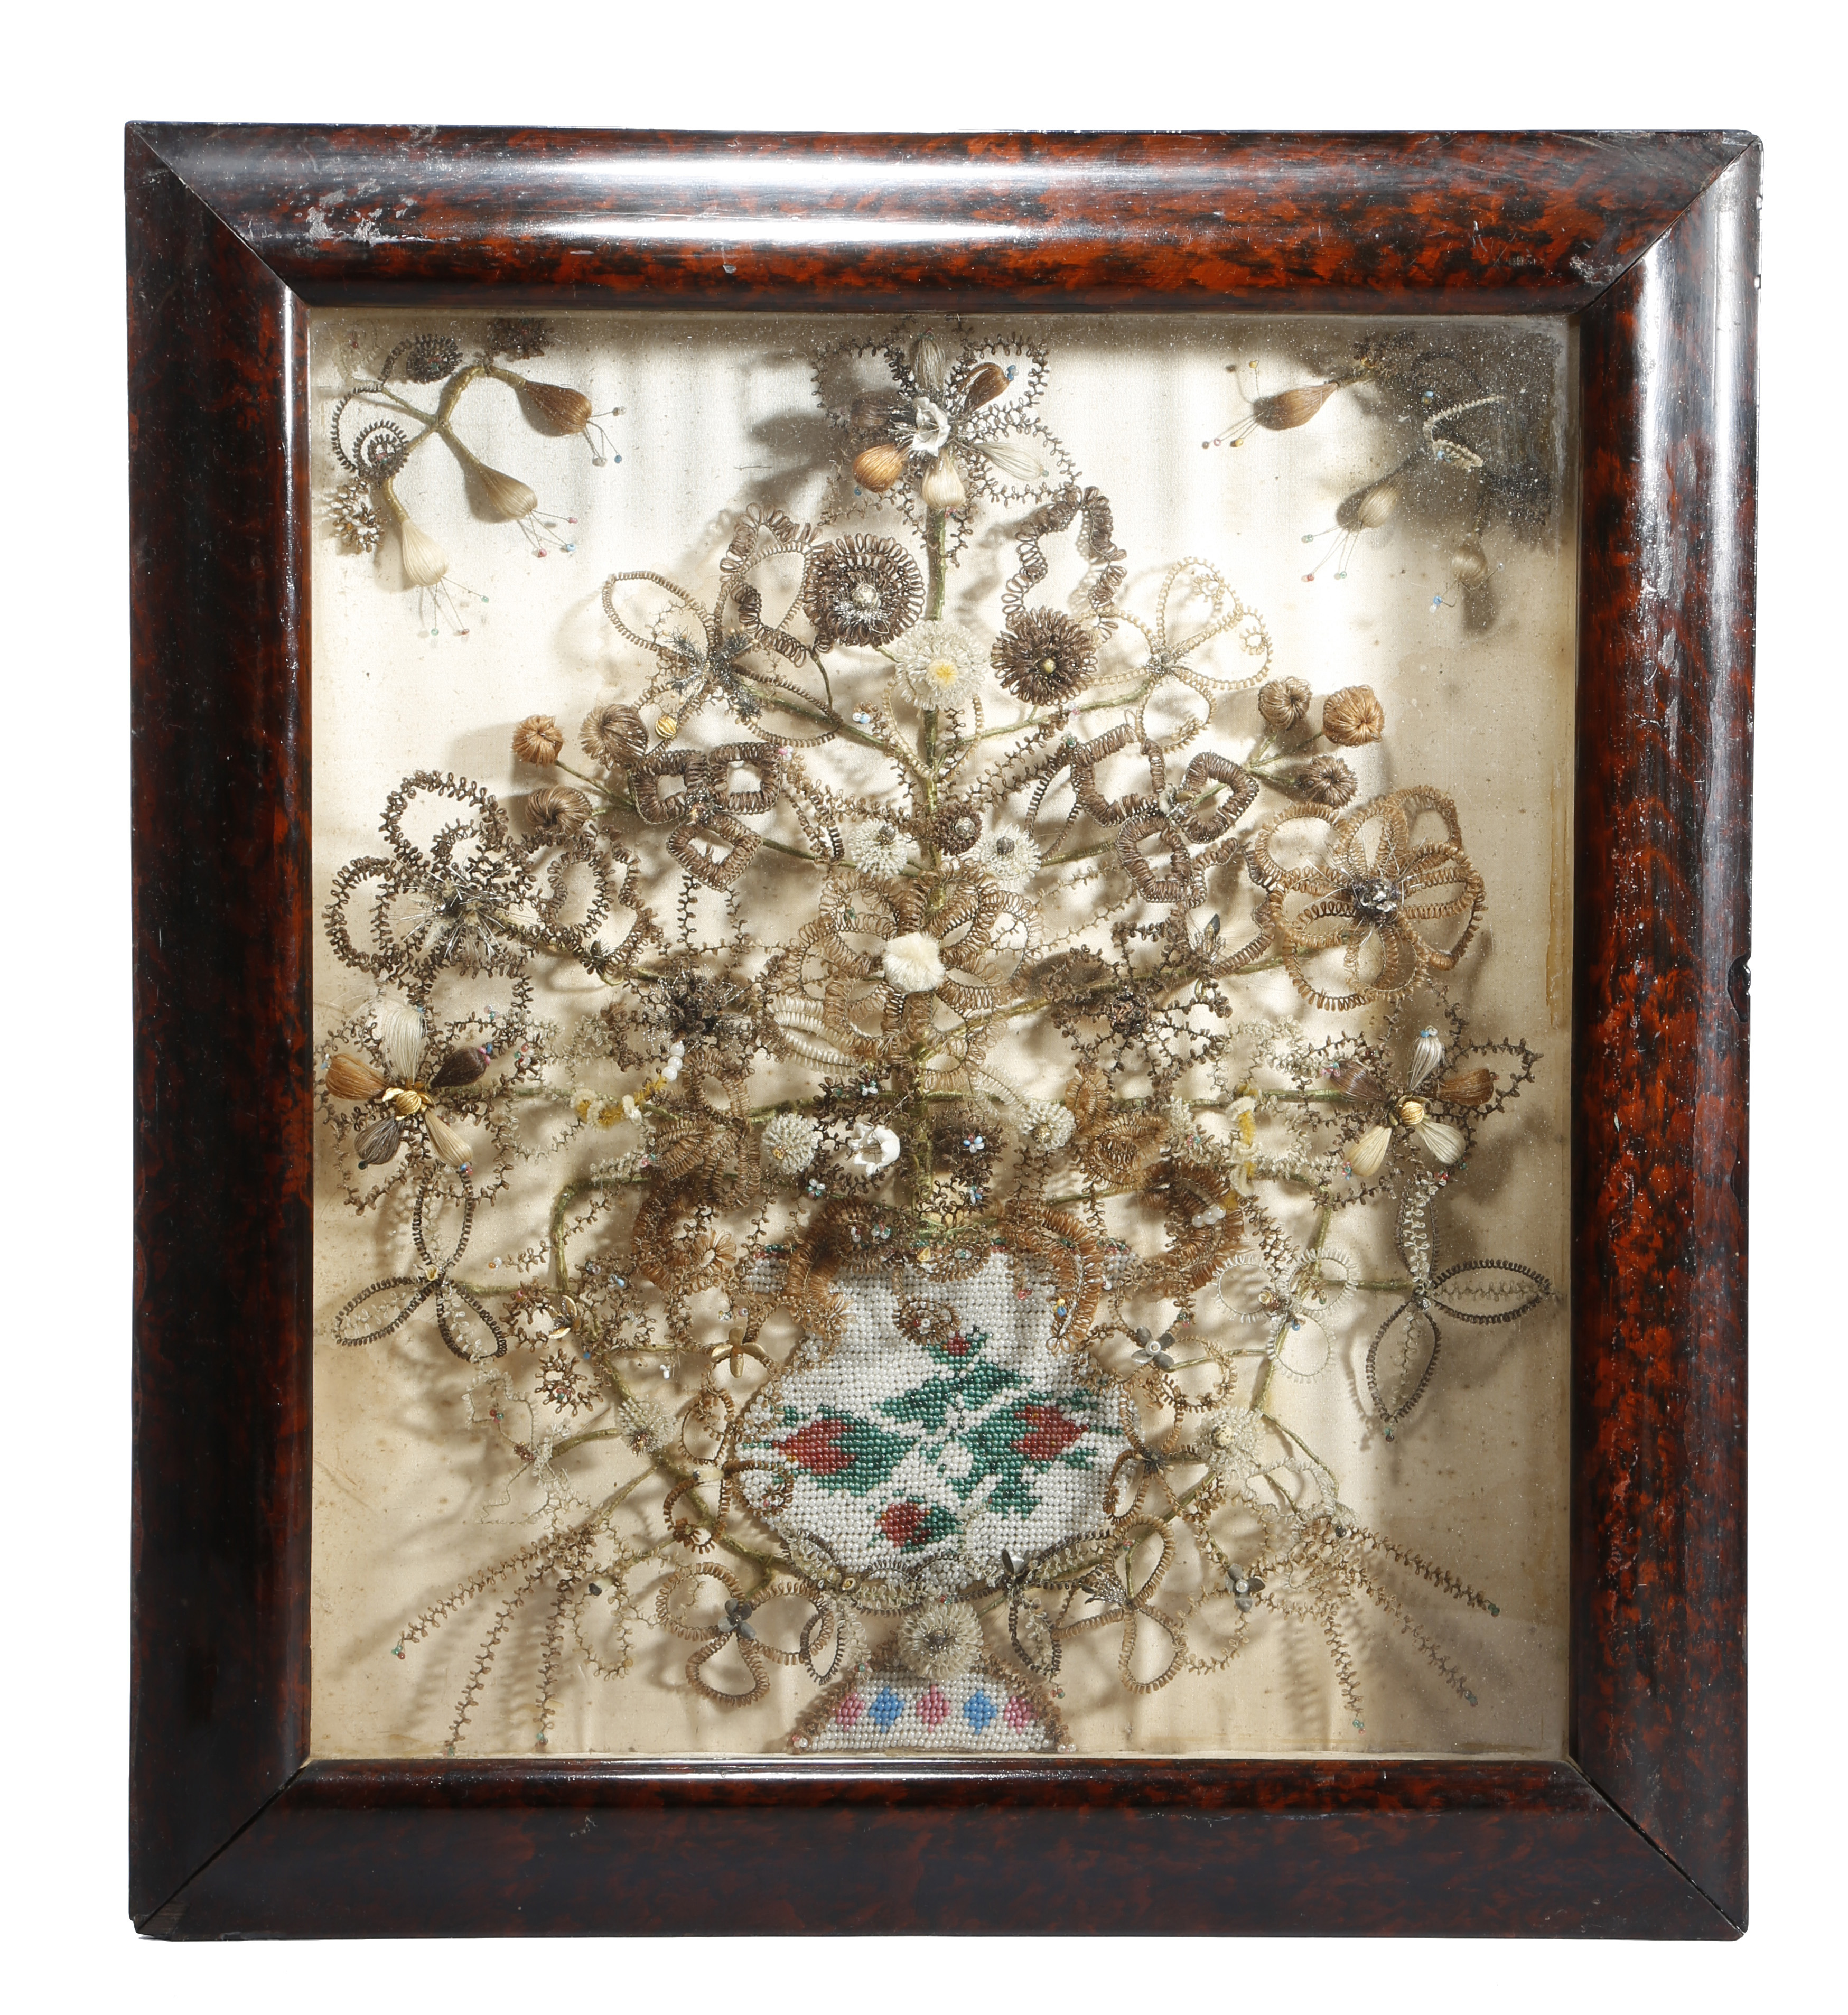 AN UNUSUAL VICTORIAN HAIR AND BEADWORK DIORAMA C.1840-50 depicting an urn of leaves and flowers, the